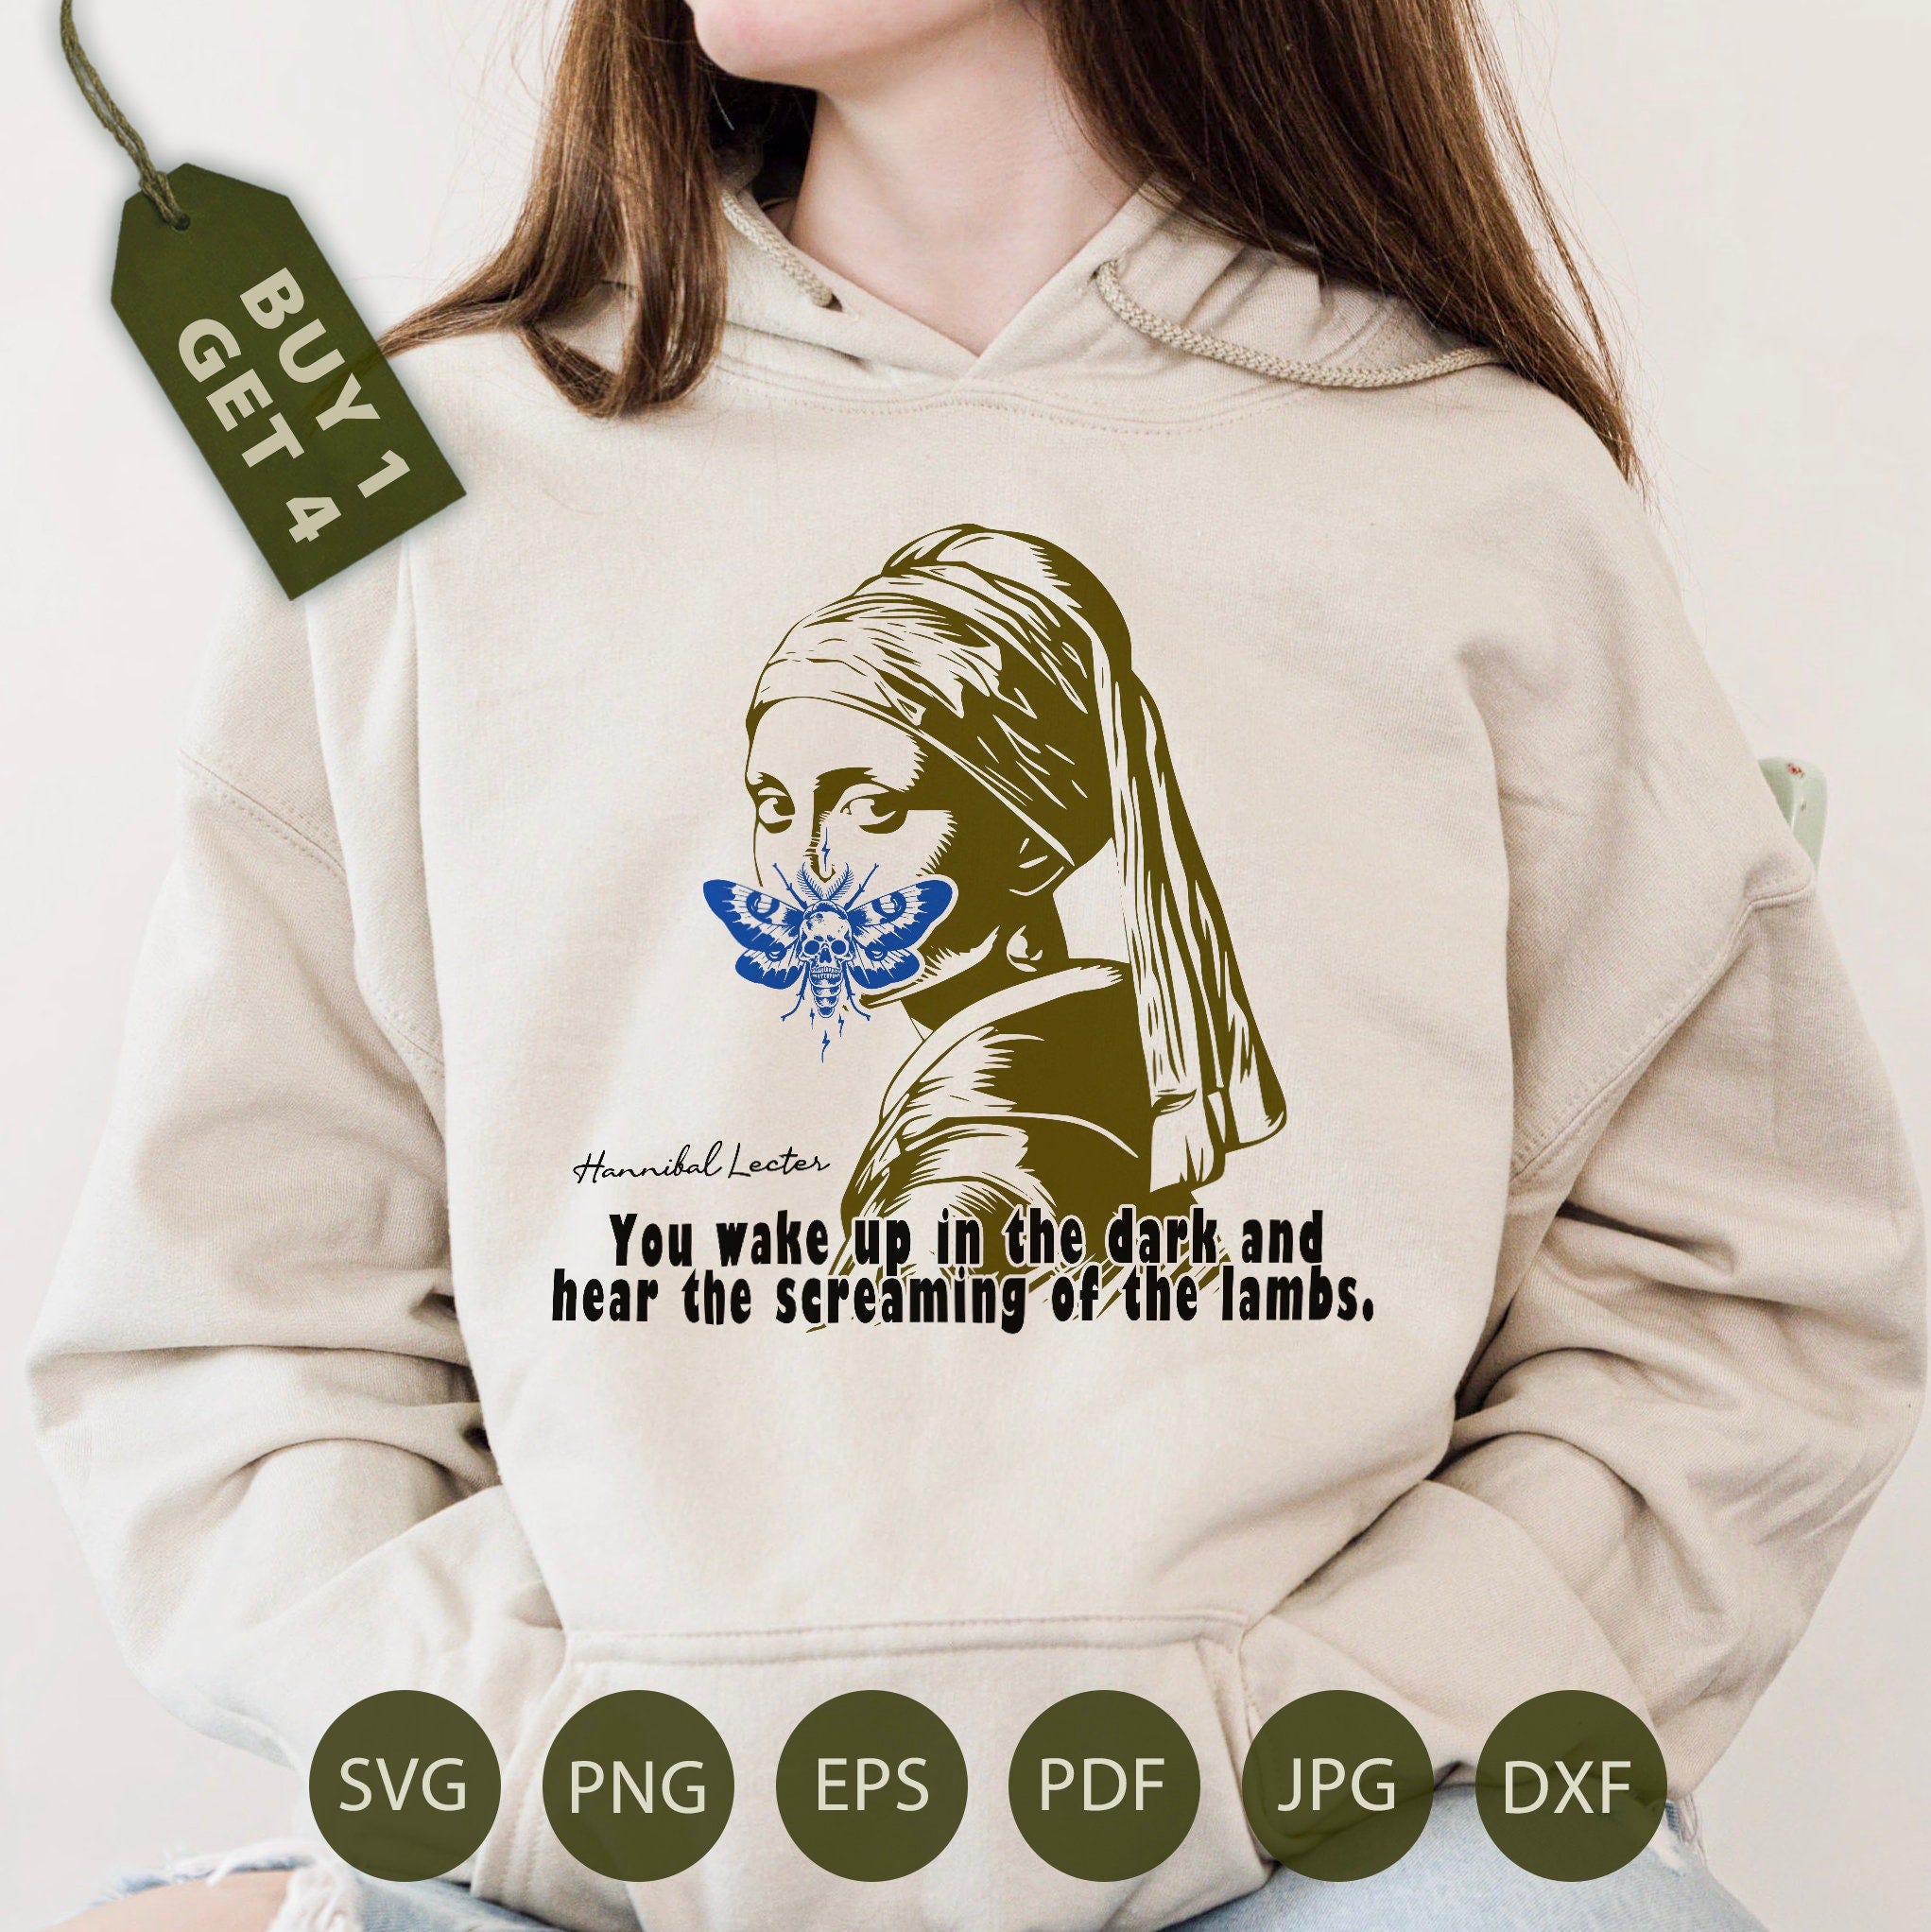 Moth PNG SVG, Scary Movie Svg, Movie Quotes Png, Hannibal Lector Saying Svg, The Silence of the Lambs Film Shirt Svg Png, Horror Png,TSH-133